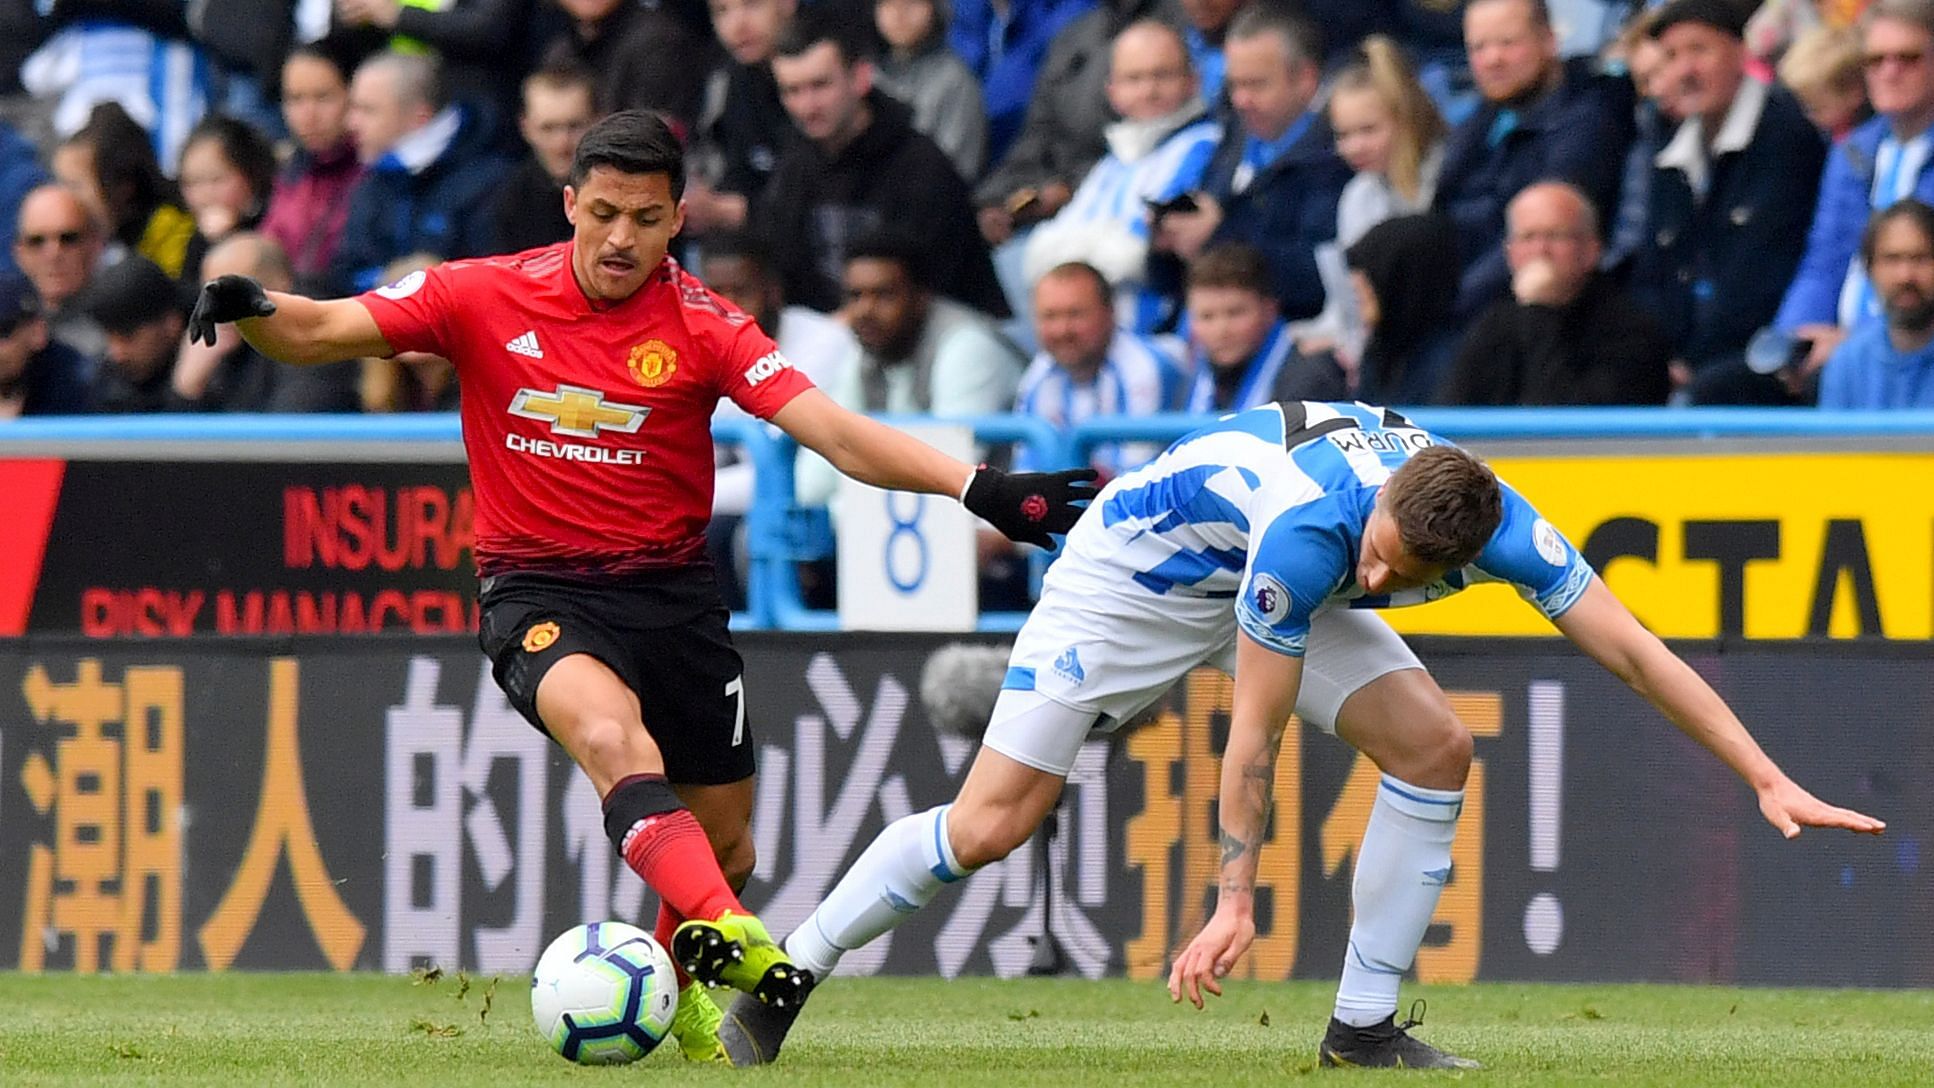 Manchester United’s Alexis Sanchez (left) and Huddersfield Town’s Erik Durm battle for the ball during the English Premier League match at the John Smith’s Stadium